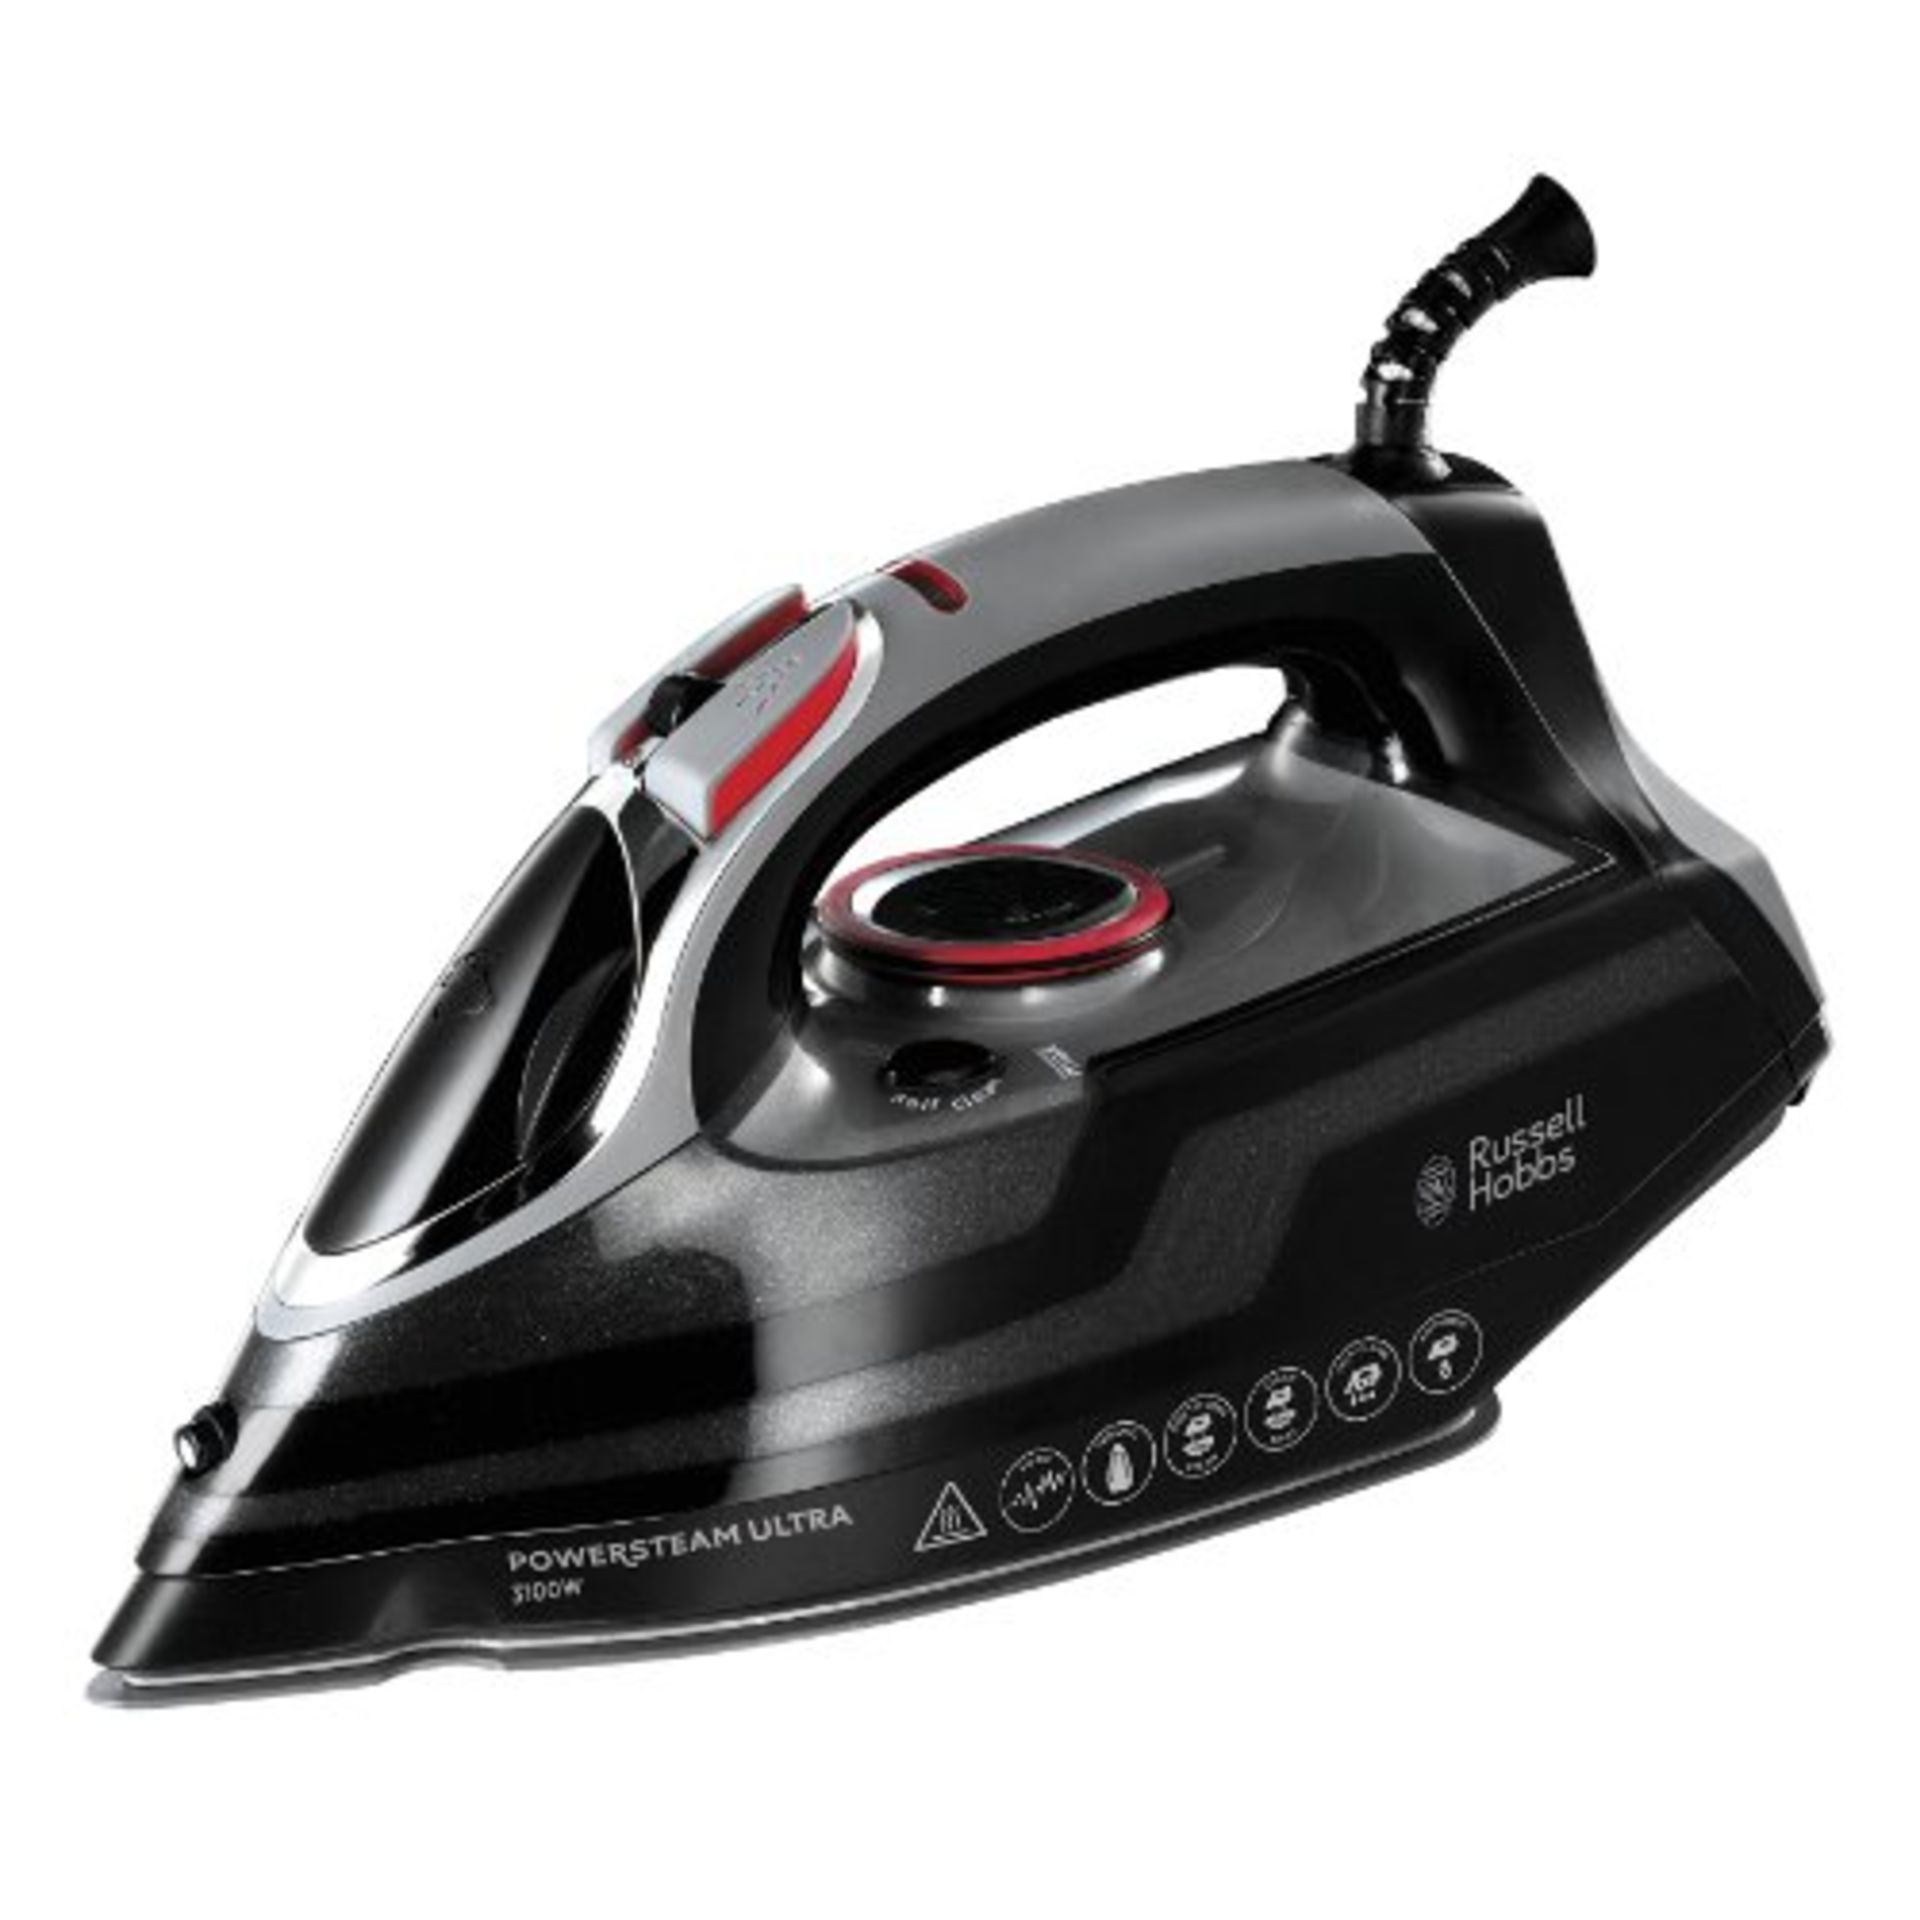 Russell Hobbs Powersteam Ultra 3100 W Vertical Steam Iron 20630 - Black and Grey - Image 4 of 15